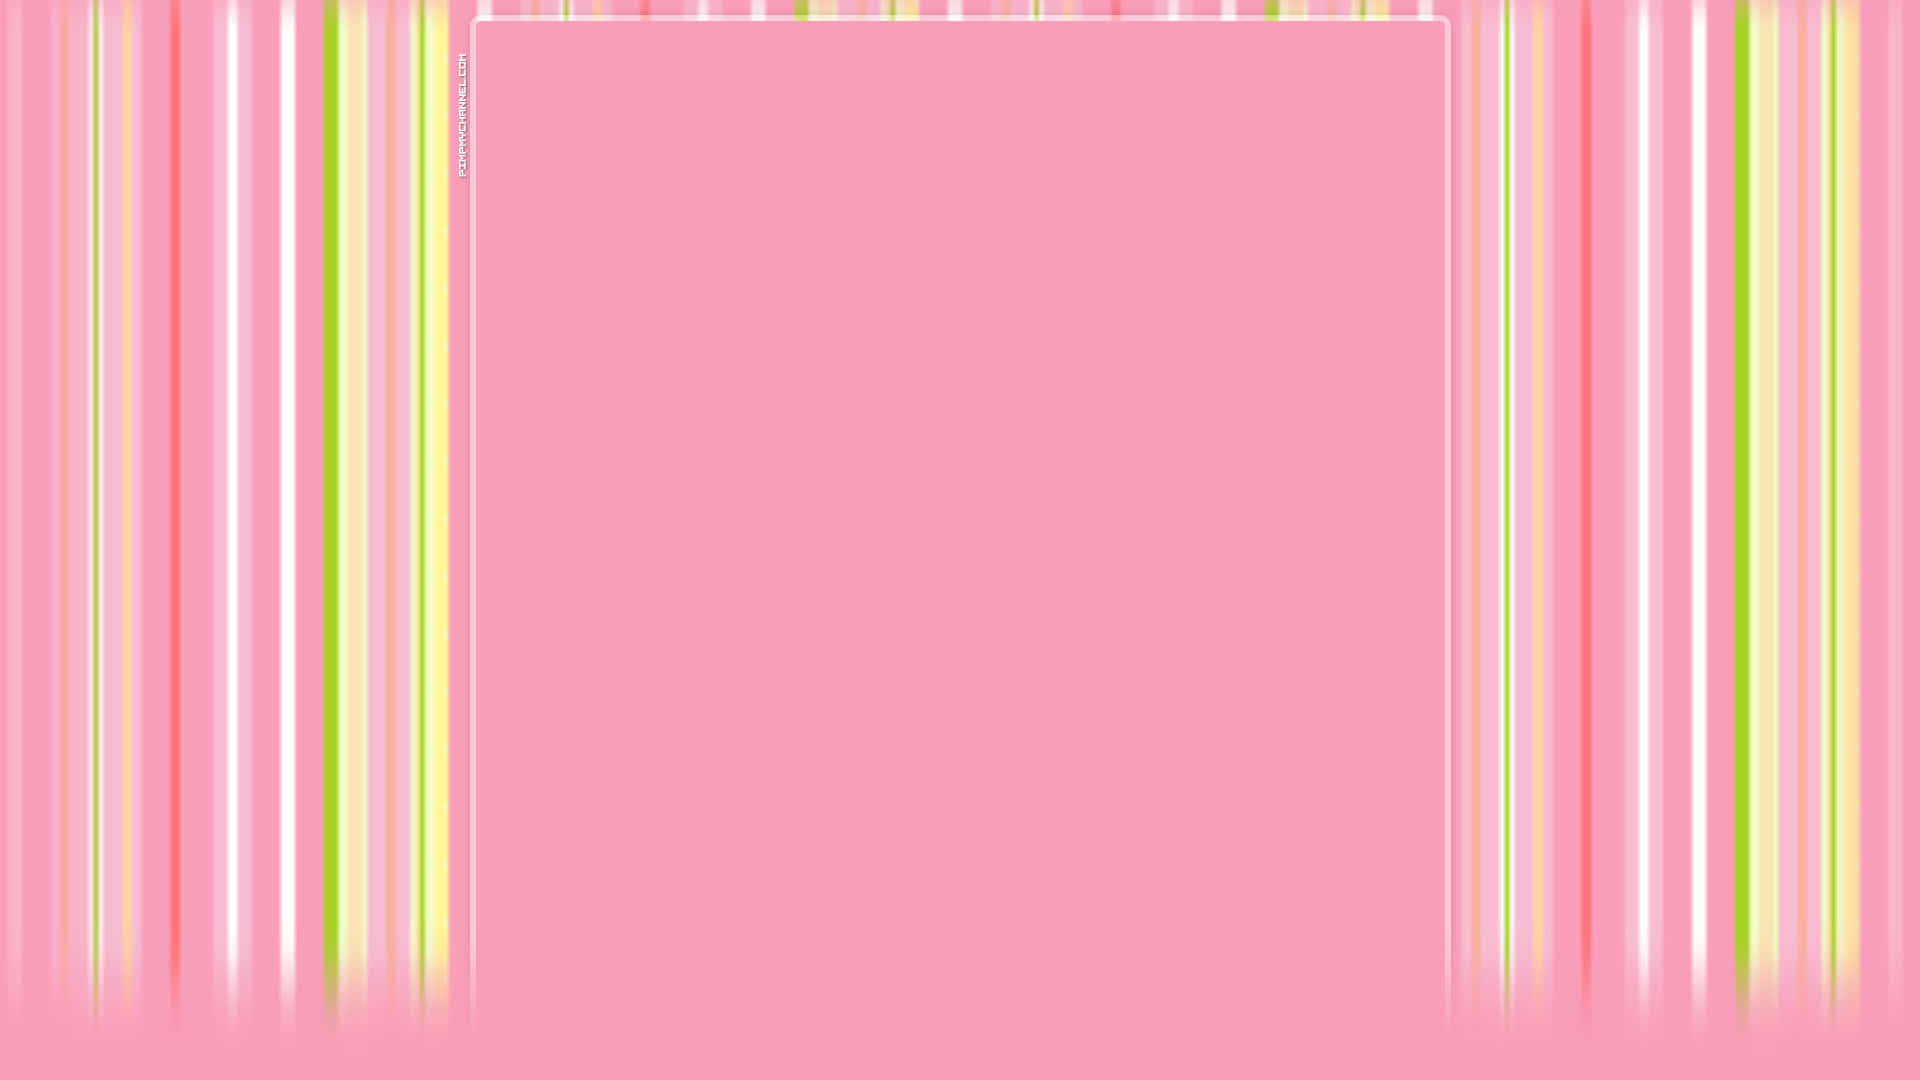 A Pink And Green Striped Background Wallpaper